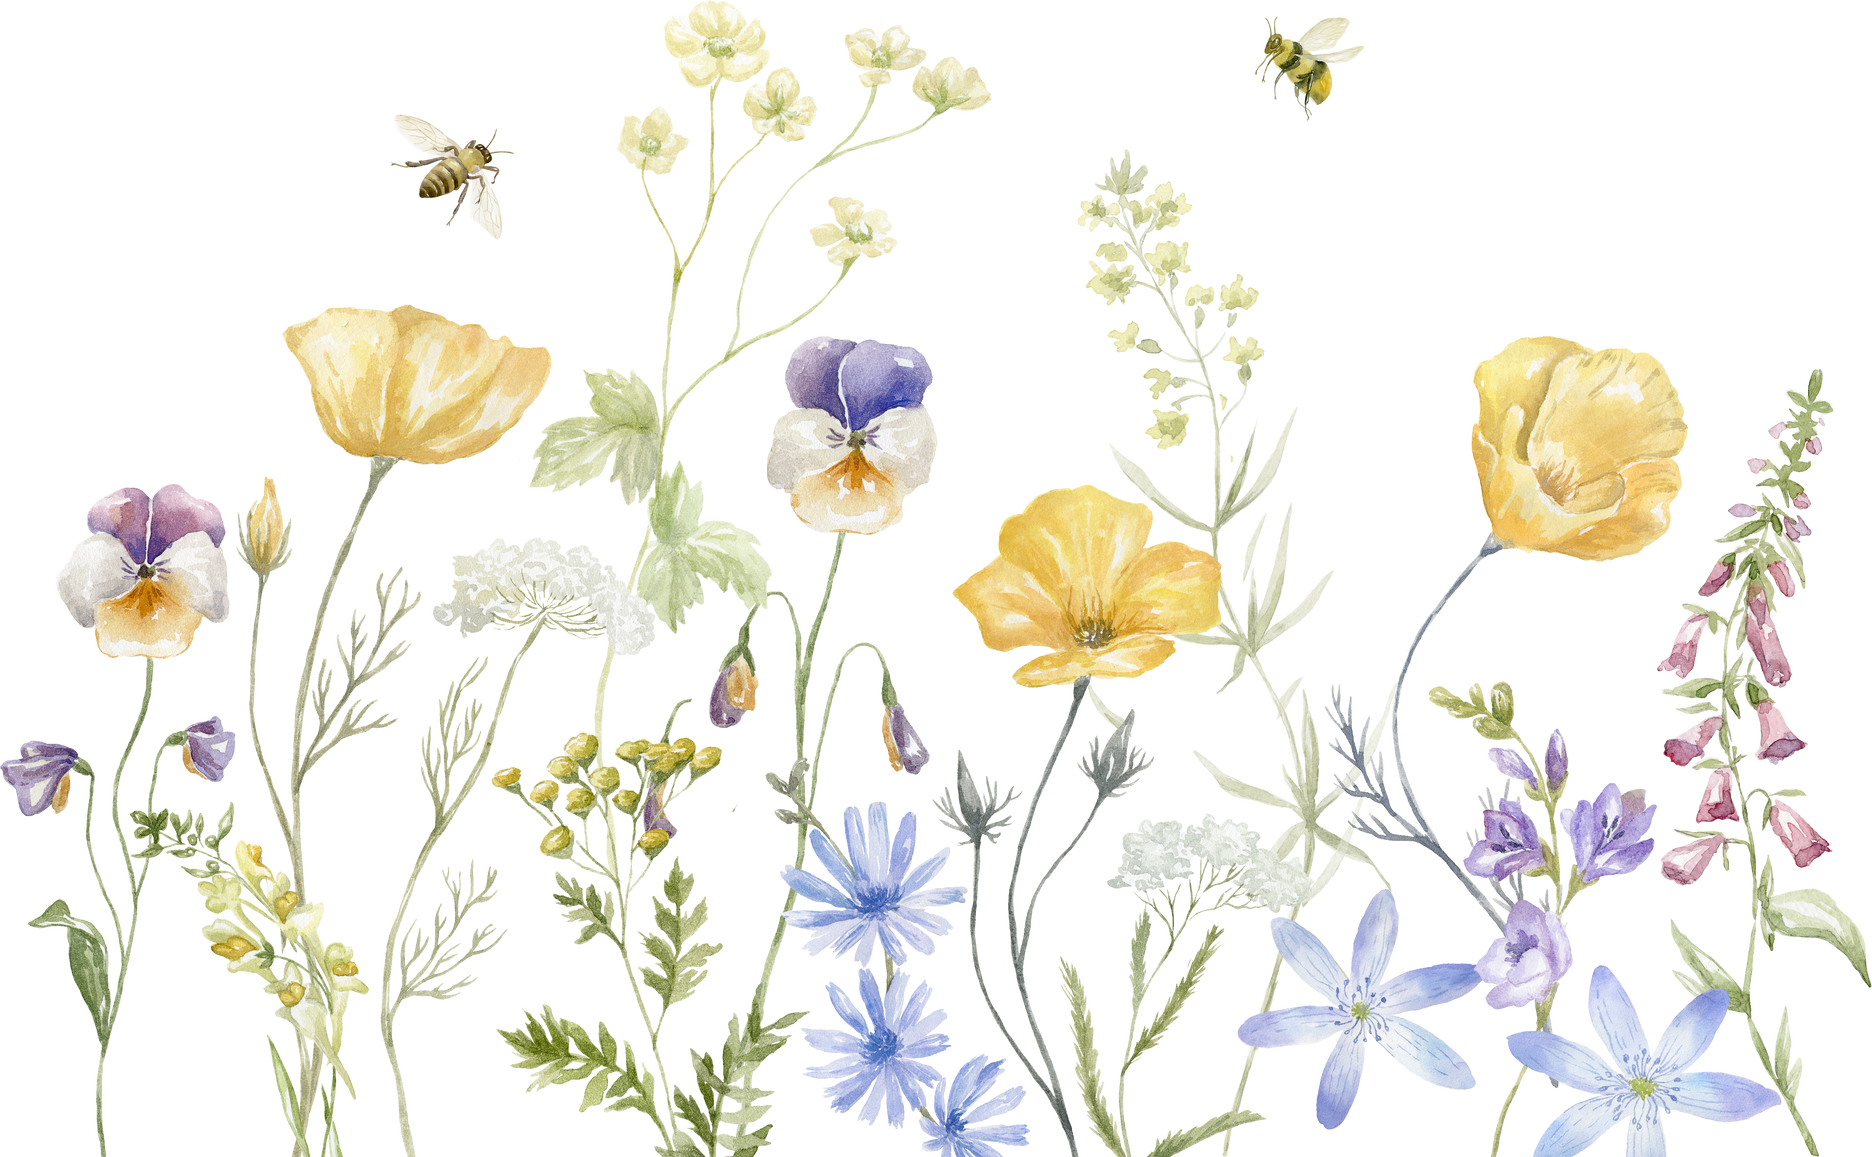 Watercolor Wildflowers Border with Bees.